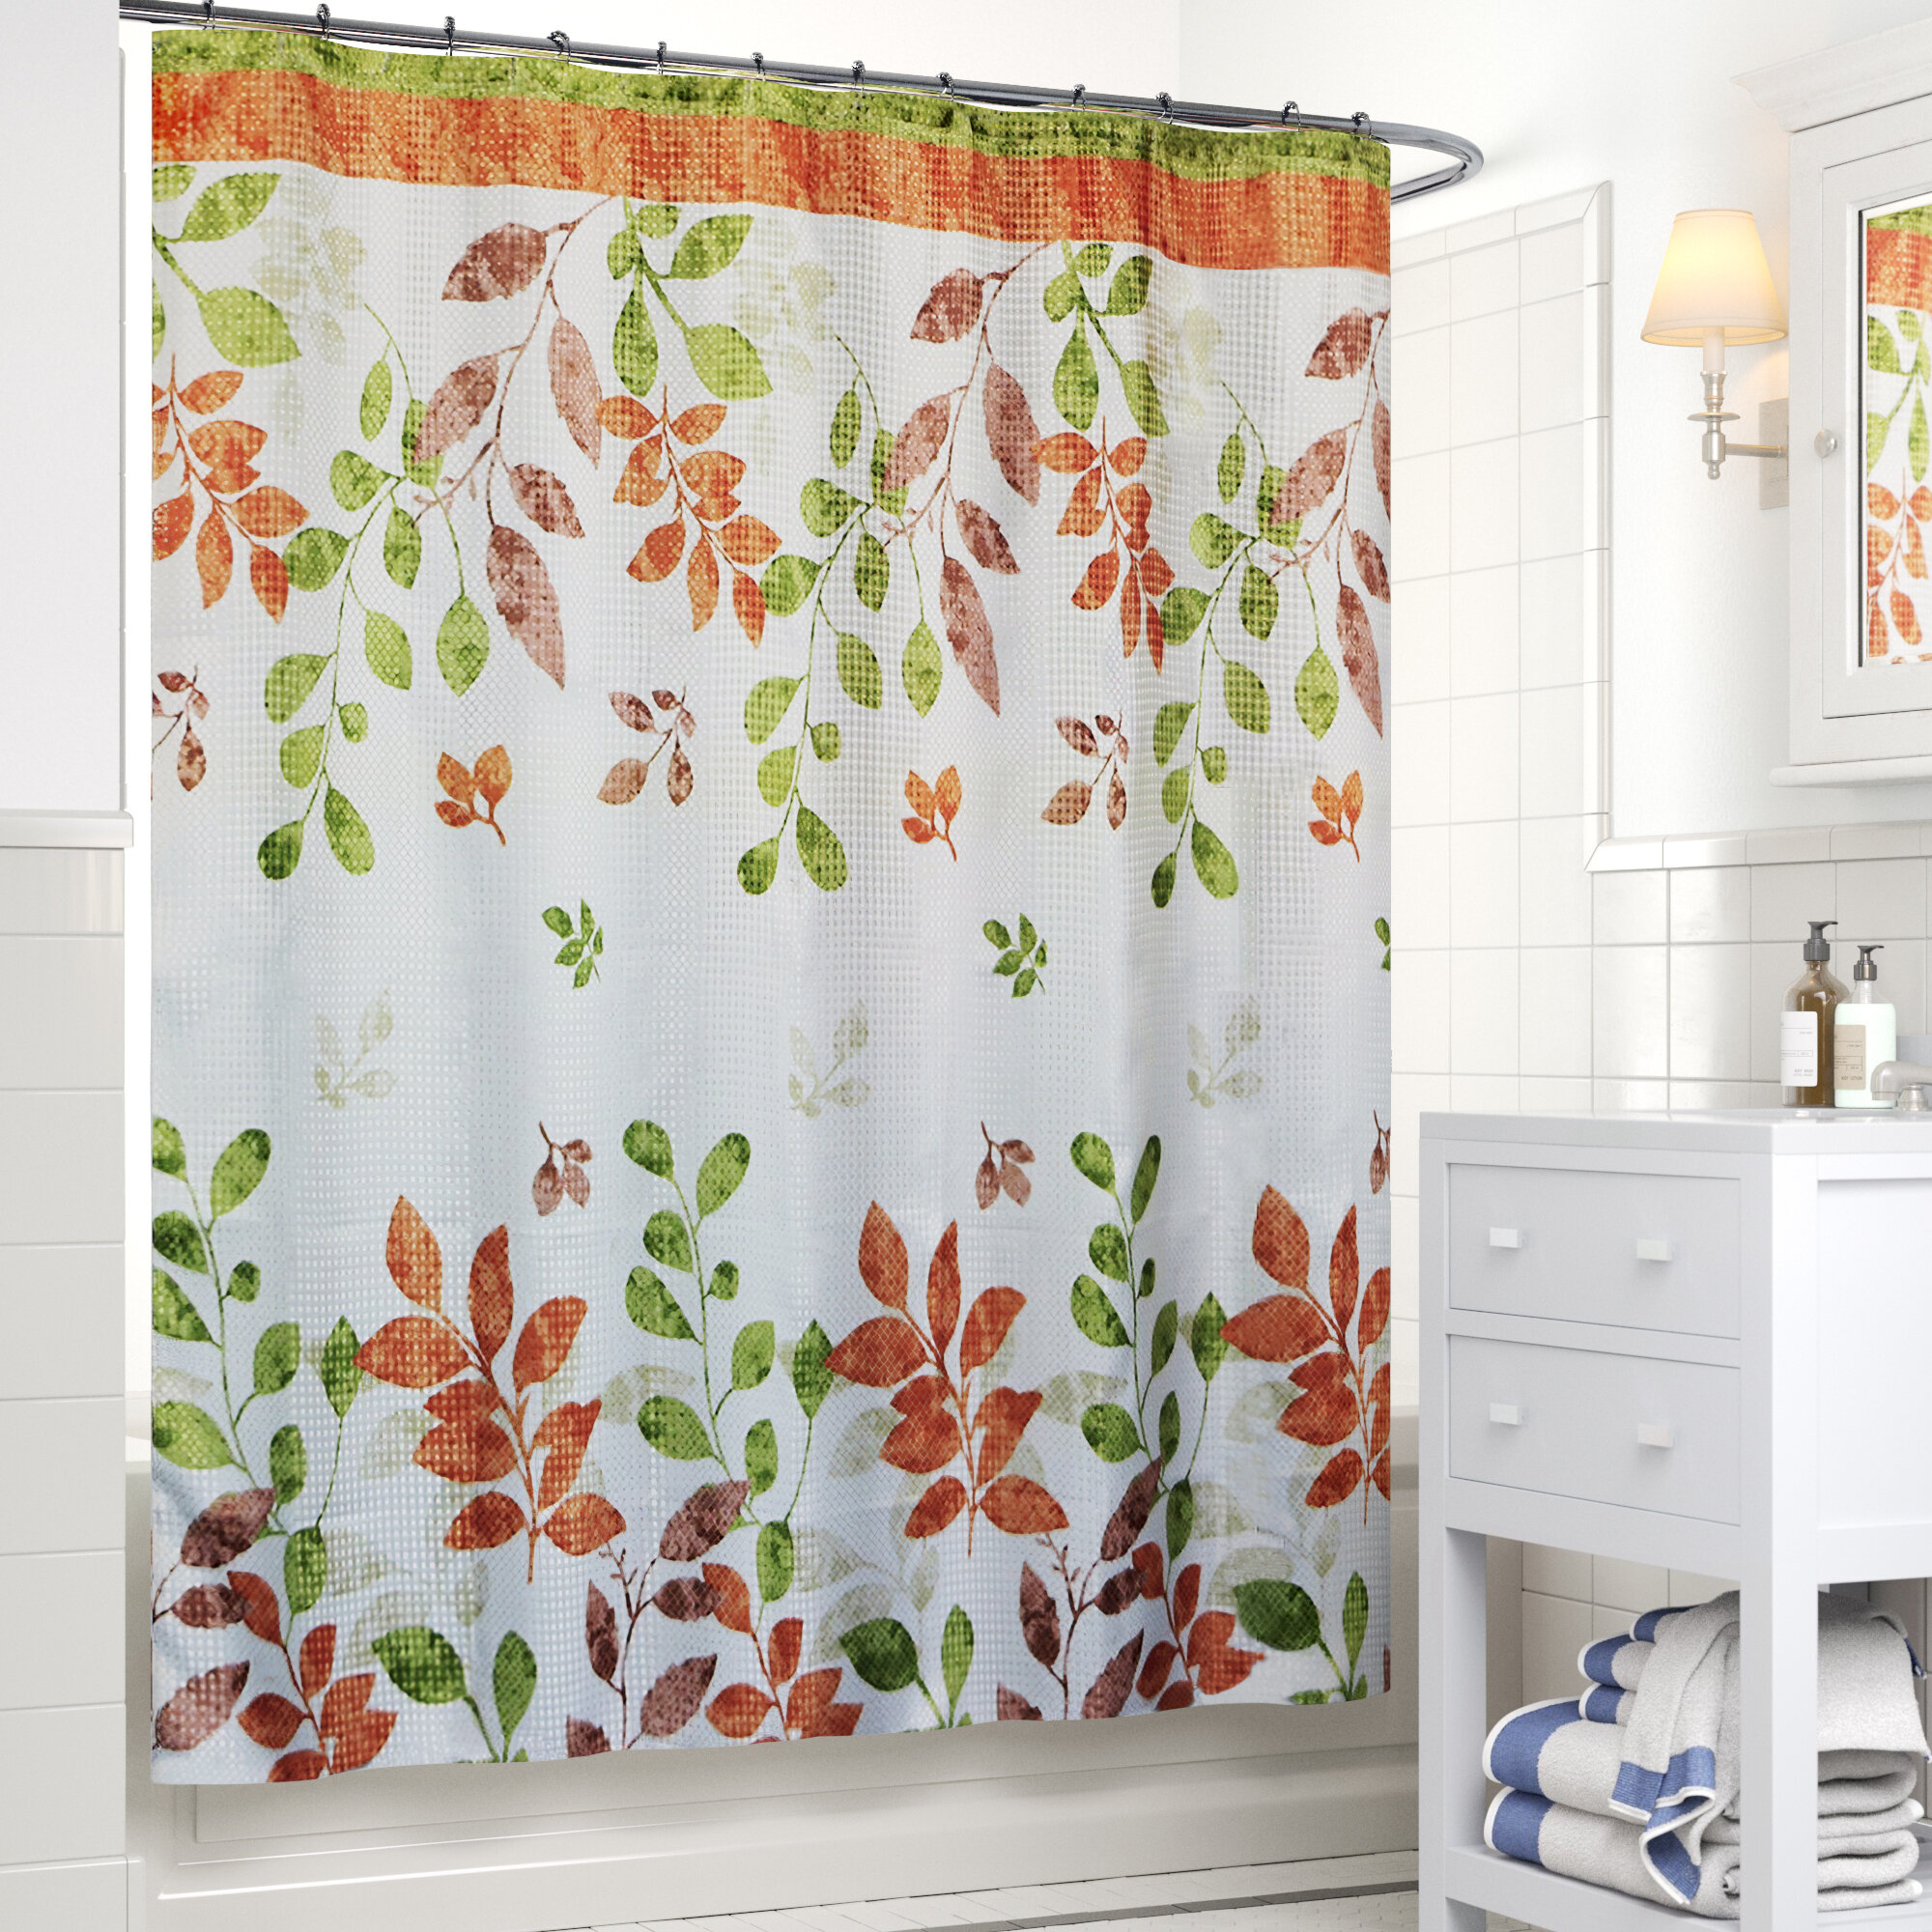 Details about   Butterfly Heavyweight Fabric Shower Curtain Entomology Script Brown Volare New 